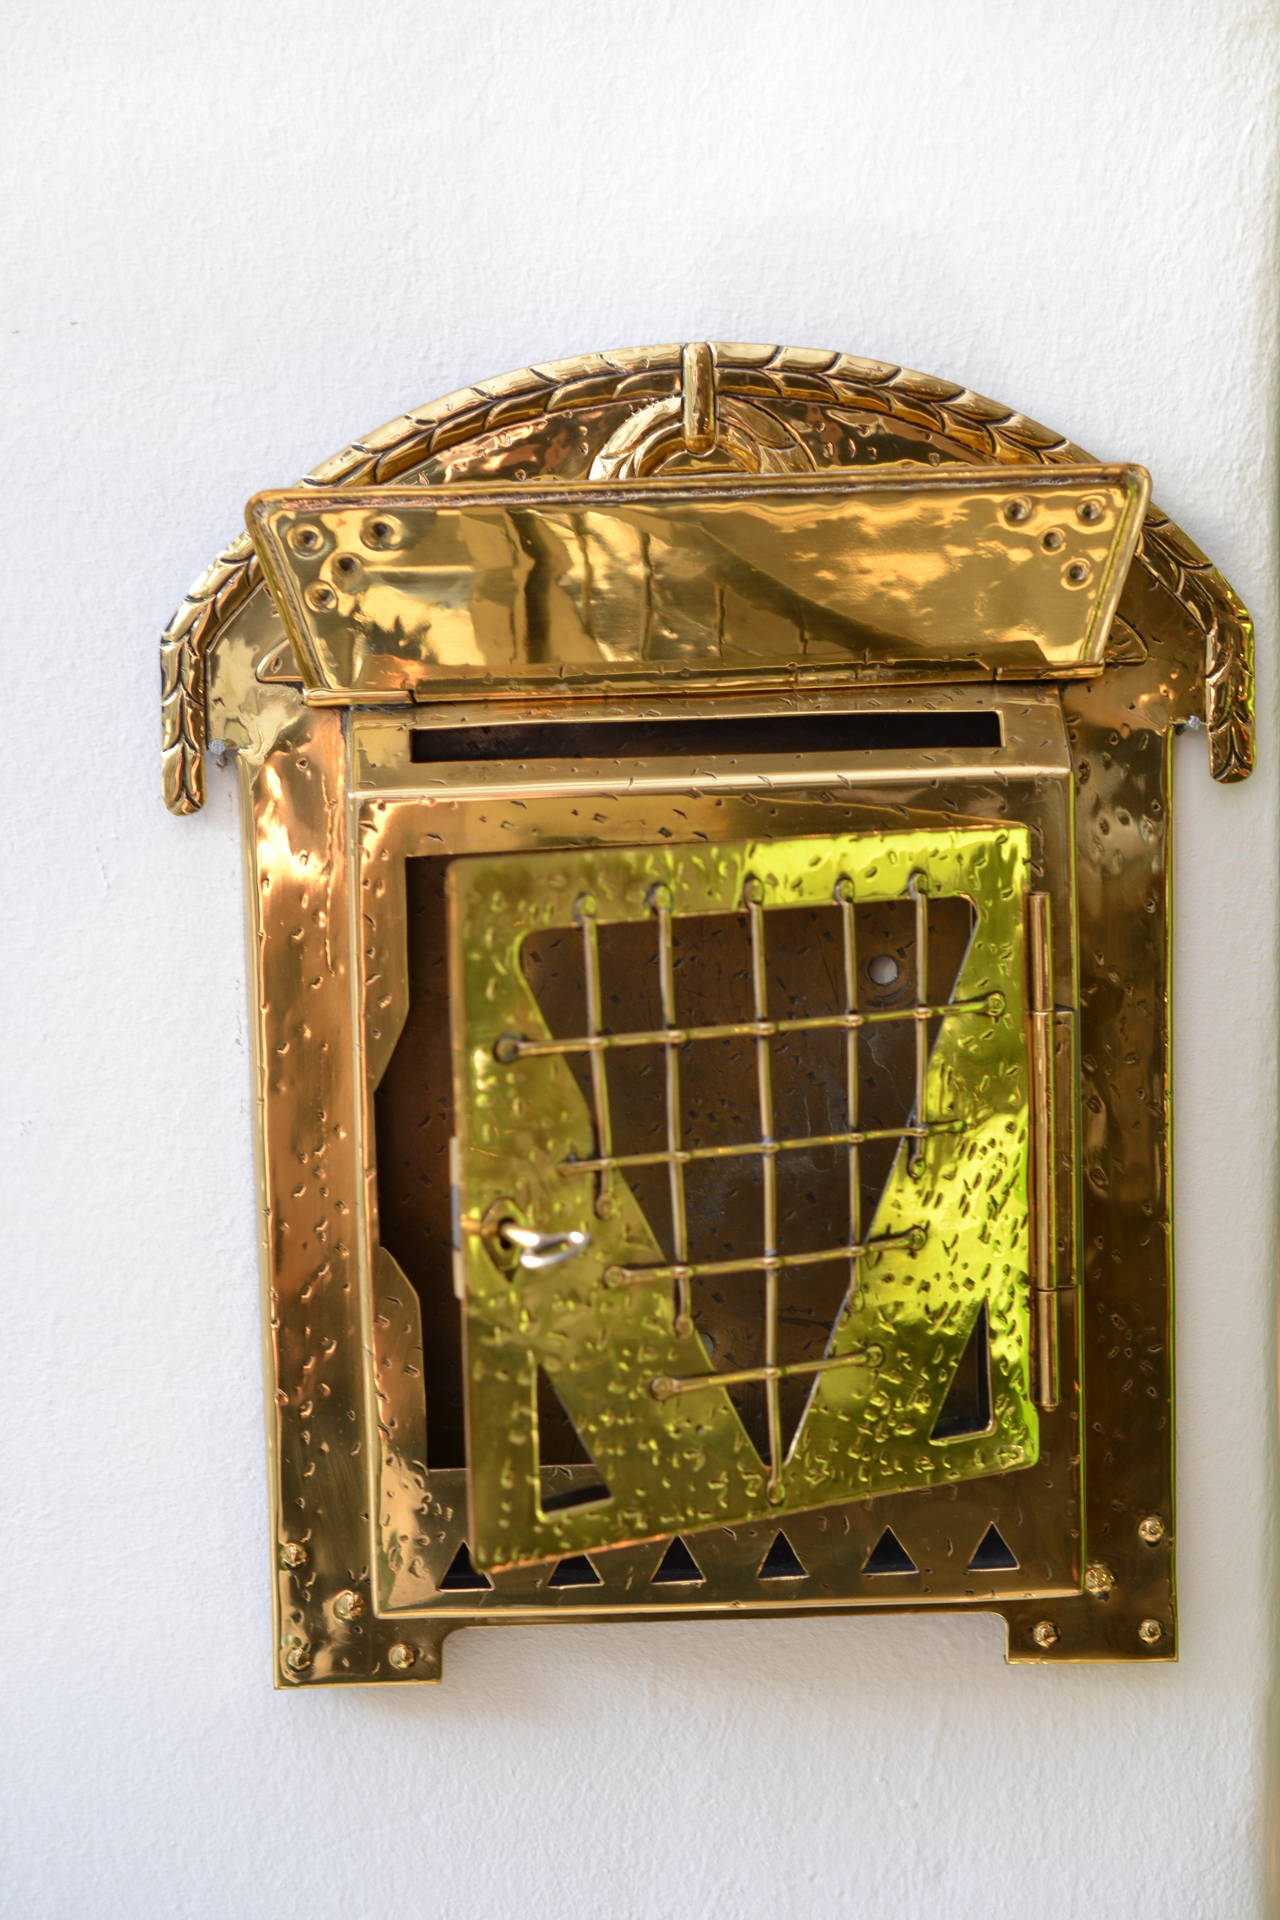 Viennese Brass letter-box hammered 
Polished and stove enamelled